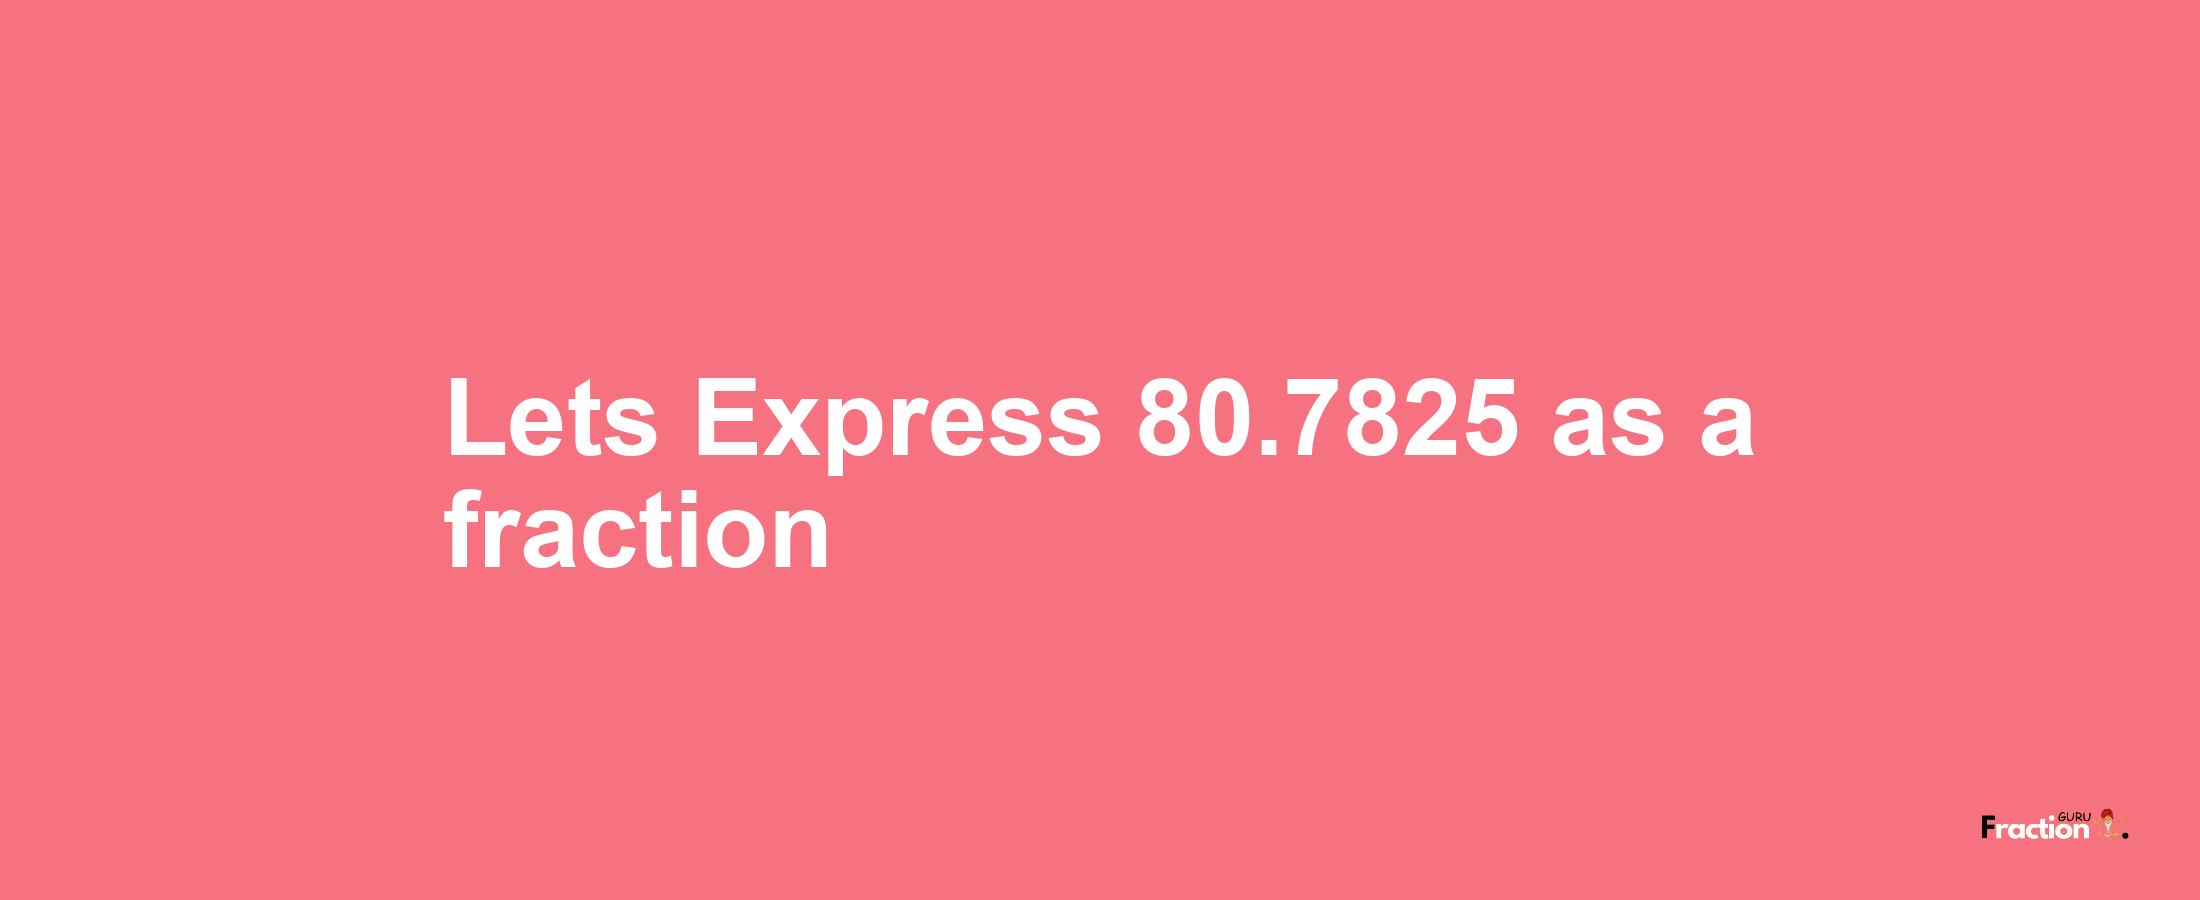 Lets Express 80.7825 as afraction